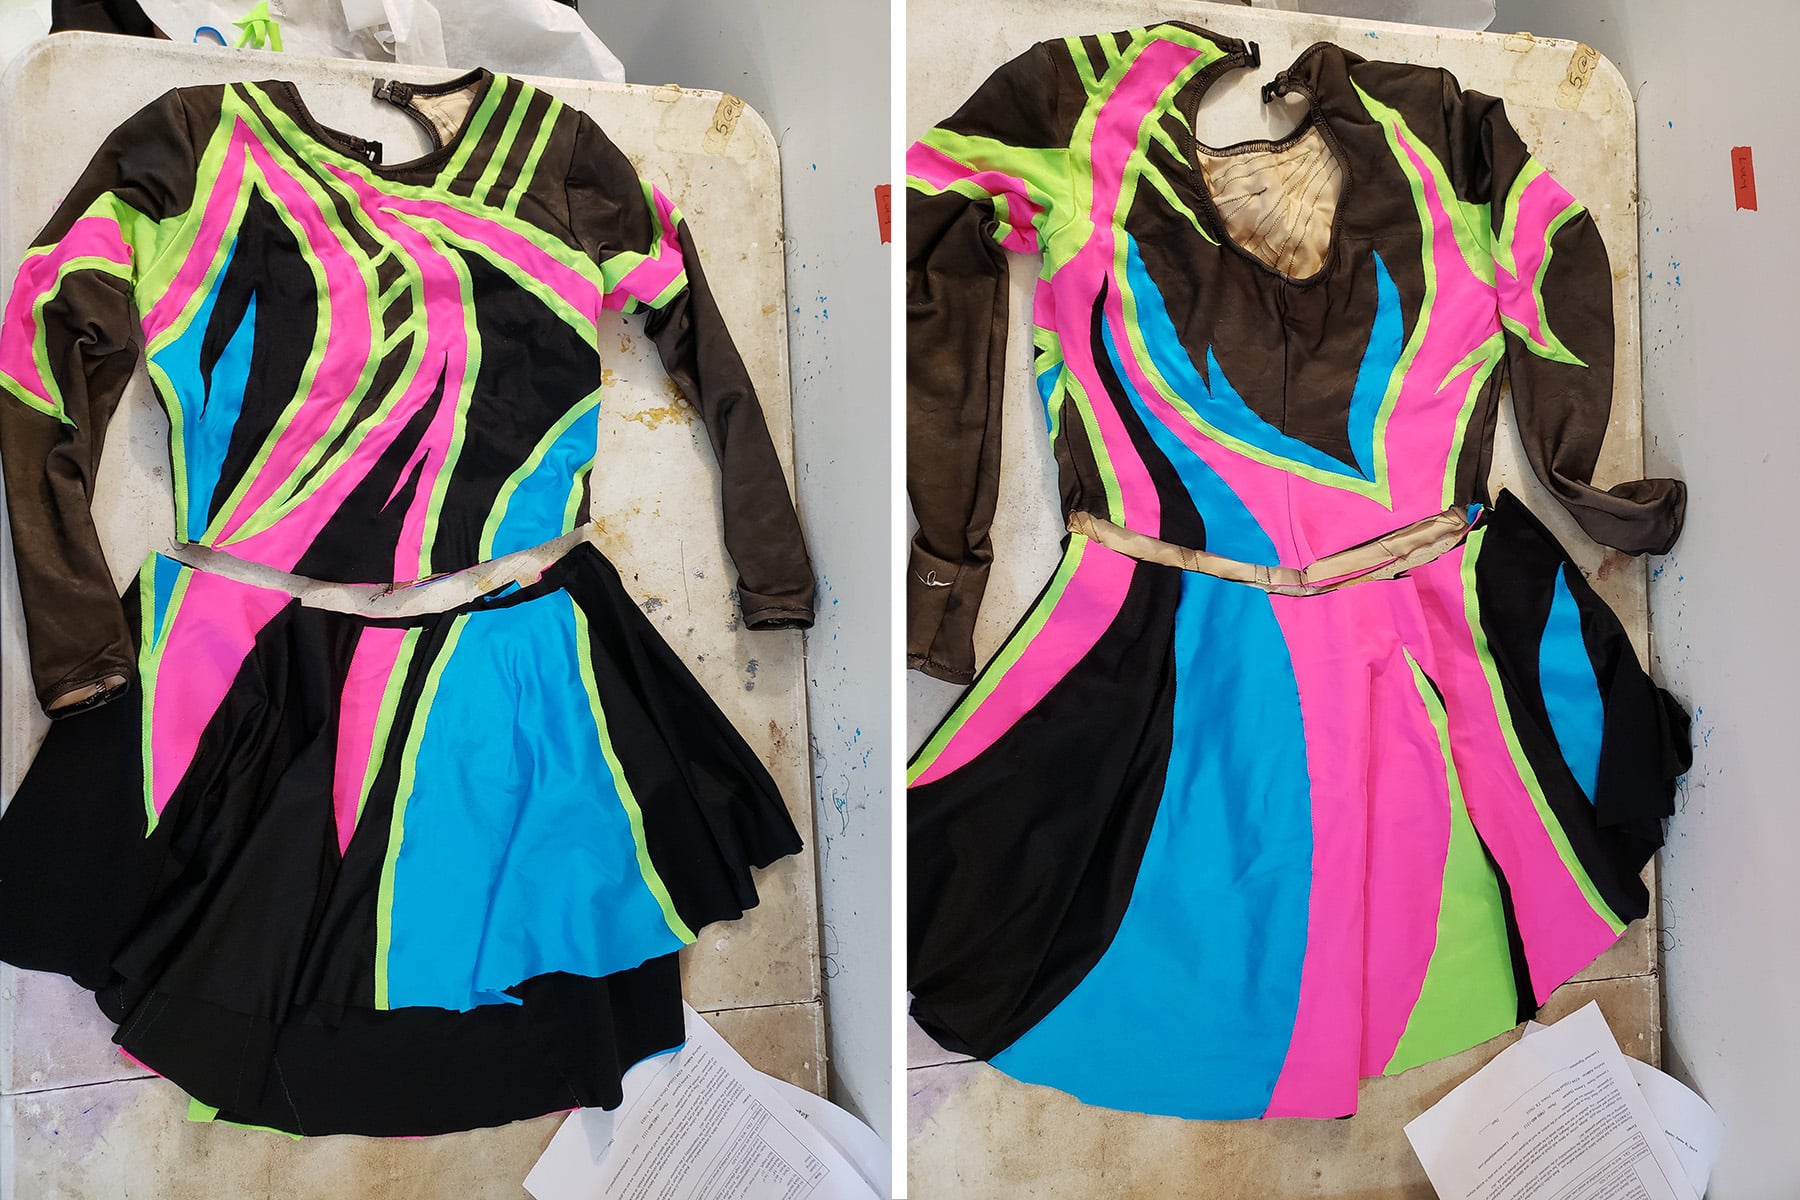 A side by side image showing the front and back view of the skating dress laid out. The bodice is separate from the skirt in this picture.